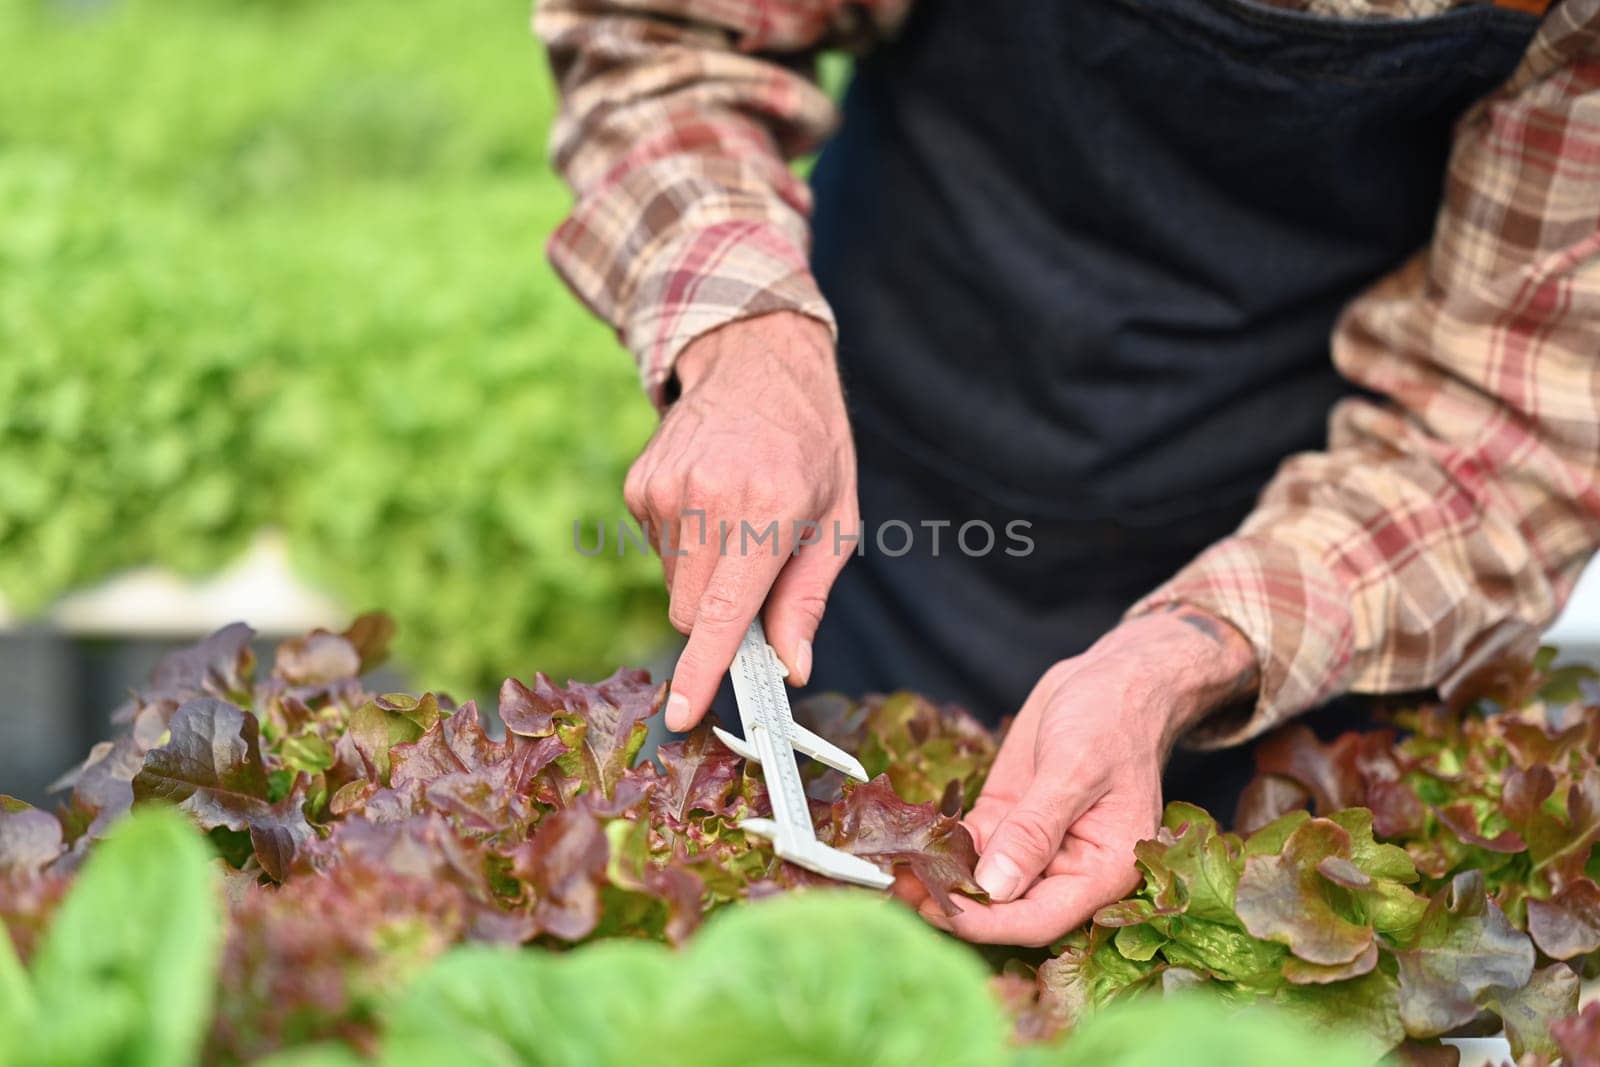 Cropped shot of farmer using a vernier caliper, checking quality of organic vegetables in greenhouse before harvesting.